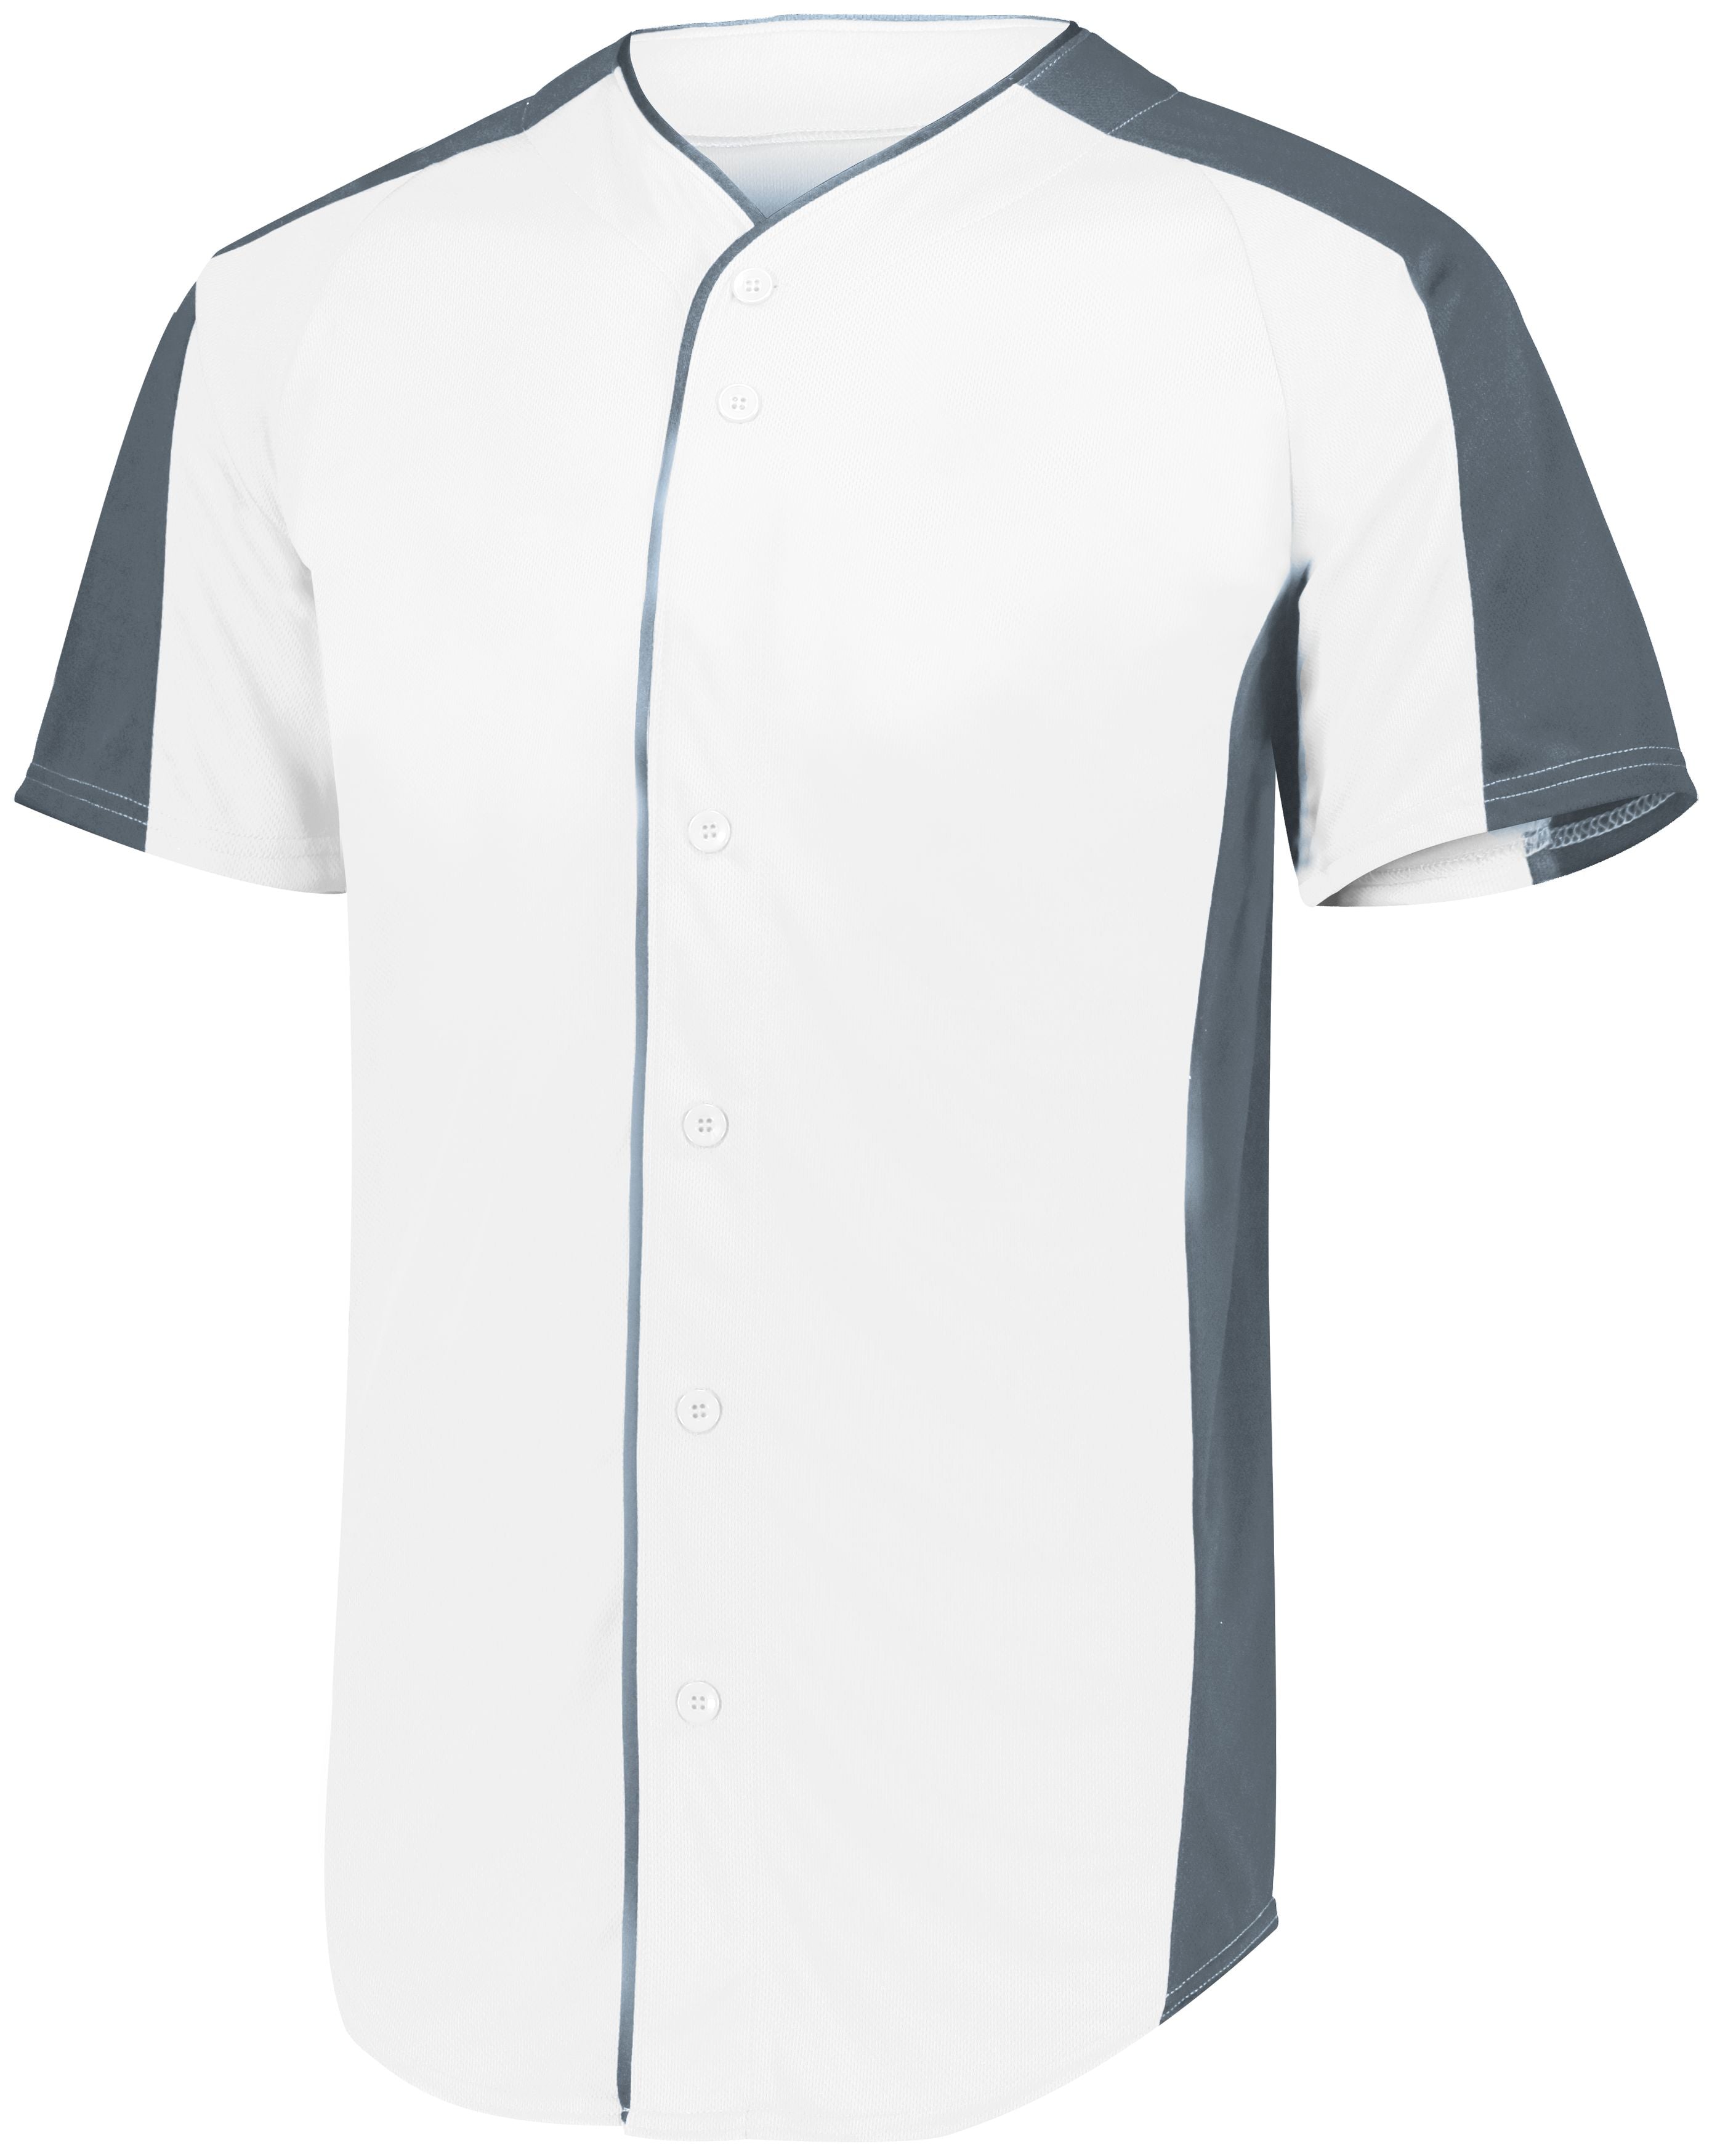 Augusta Sportswear Youth Full-Button Baseball Jersey in White/Graphite  -Part of the Youth, Youth-Jersey, Augusta-Products, Baseball, Shirts, All-Sports, All-Sports-1 product lines at KanaleyCreations.com